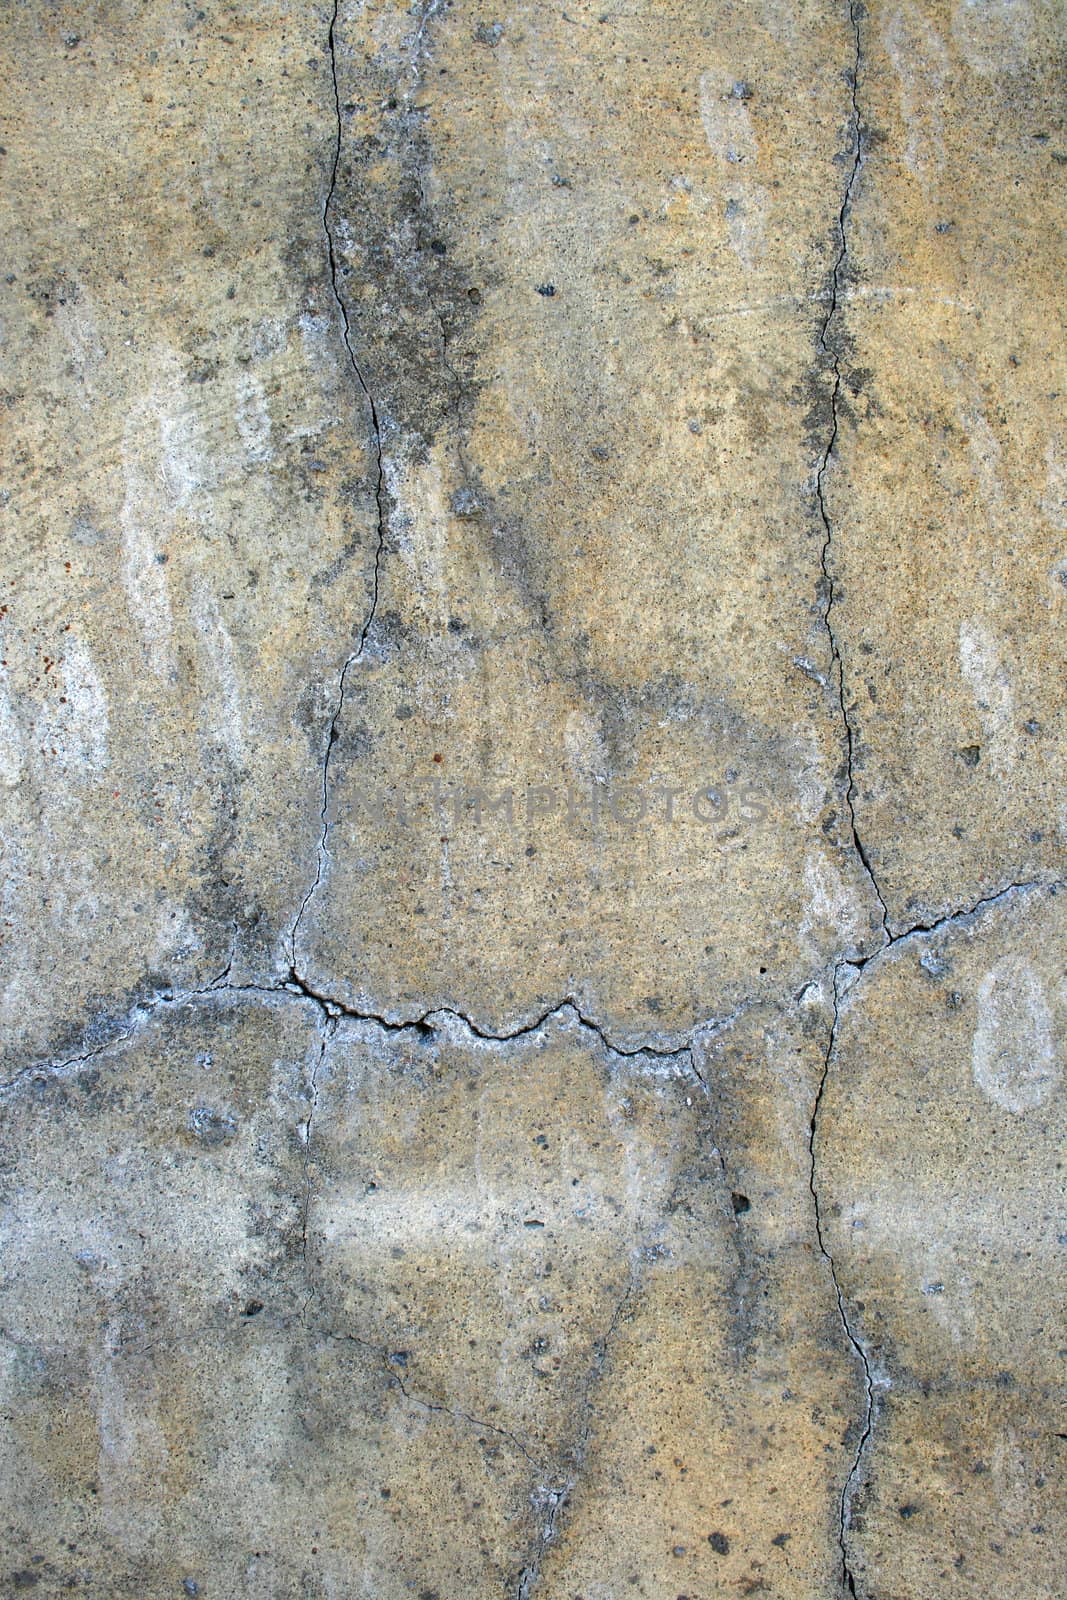 Old cracked concrete wall: grunge urban background